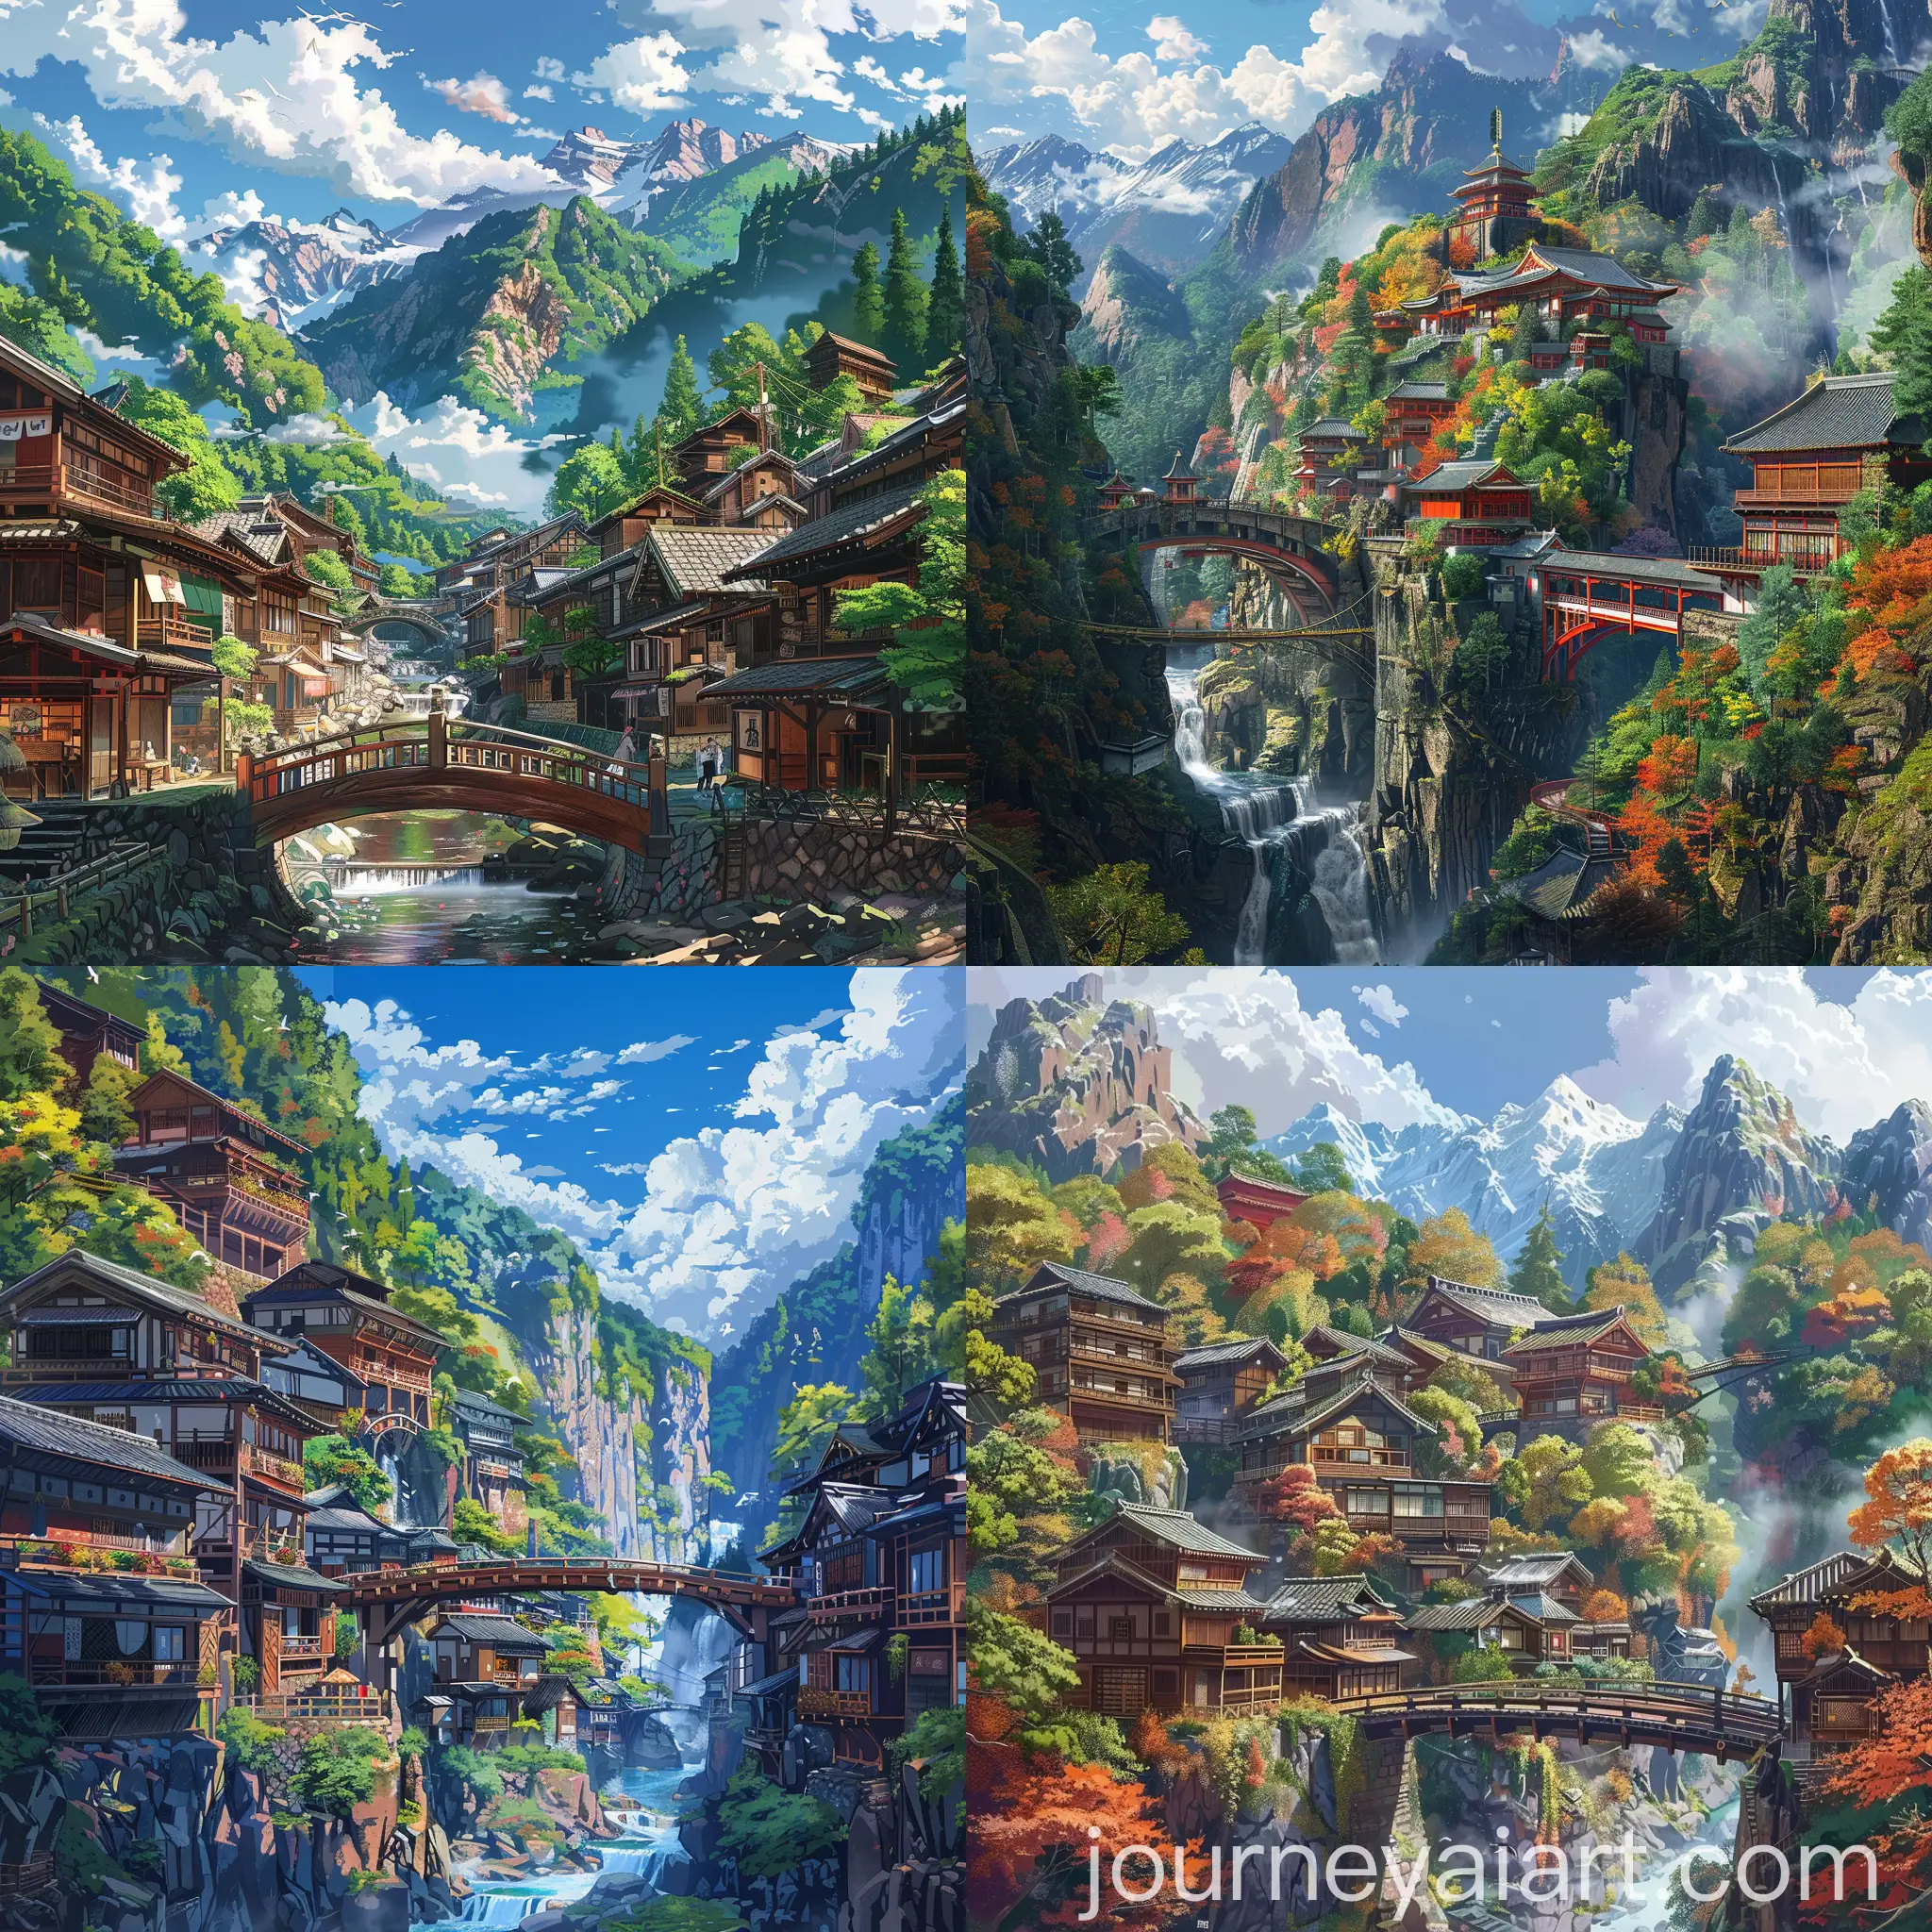 Feudal-Japan-Village-High-in-Mountains-Connected-by-Fearless-Bridge